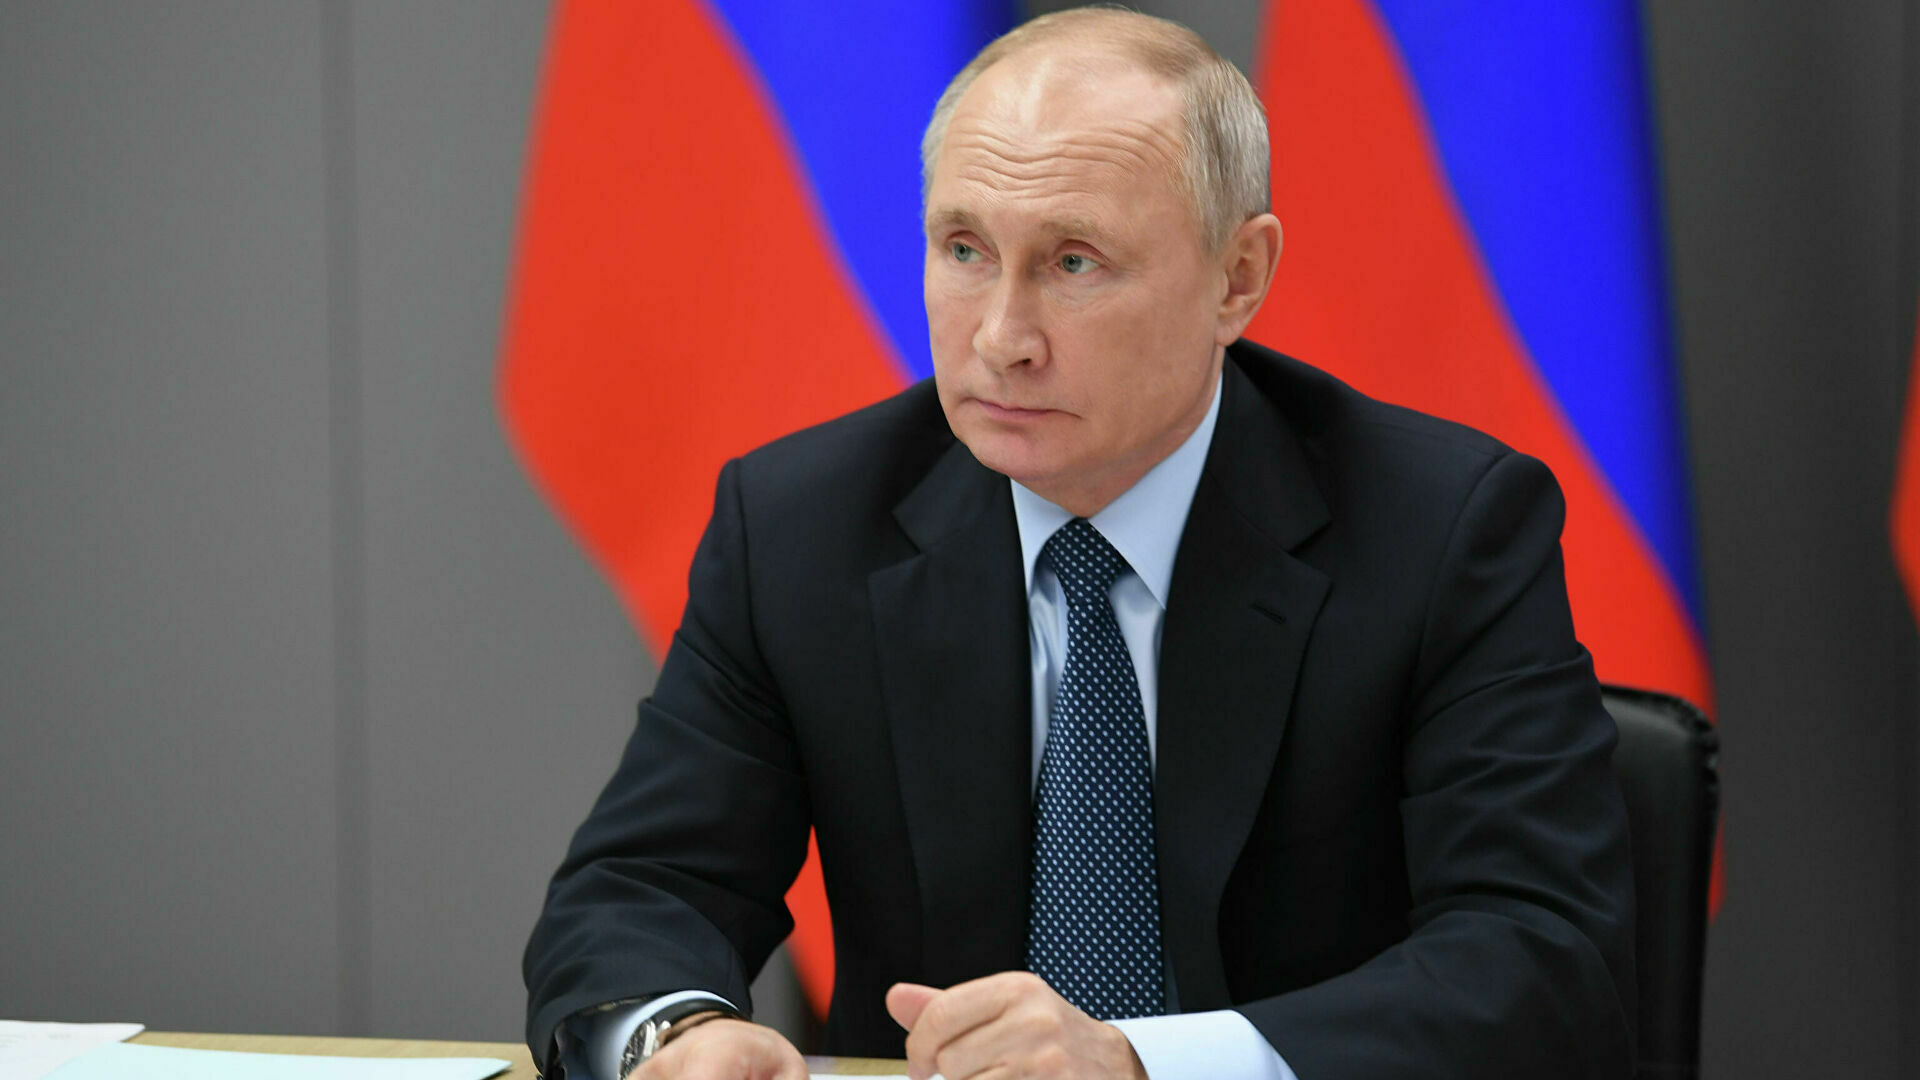 Vladimir Putin will hold the annual big press conference on December 23